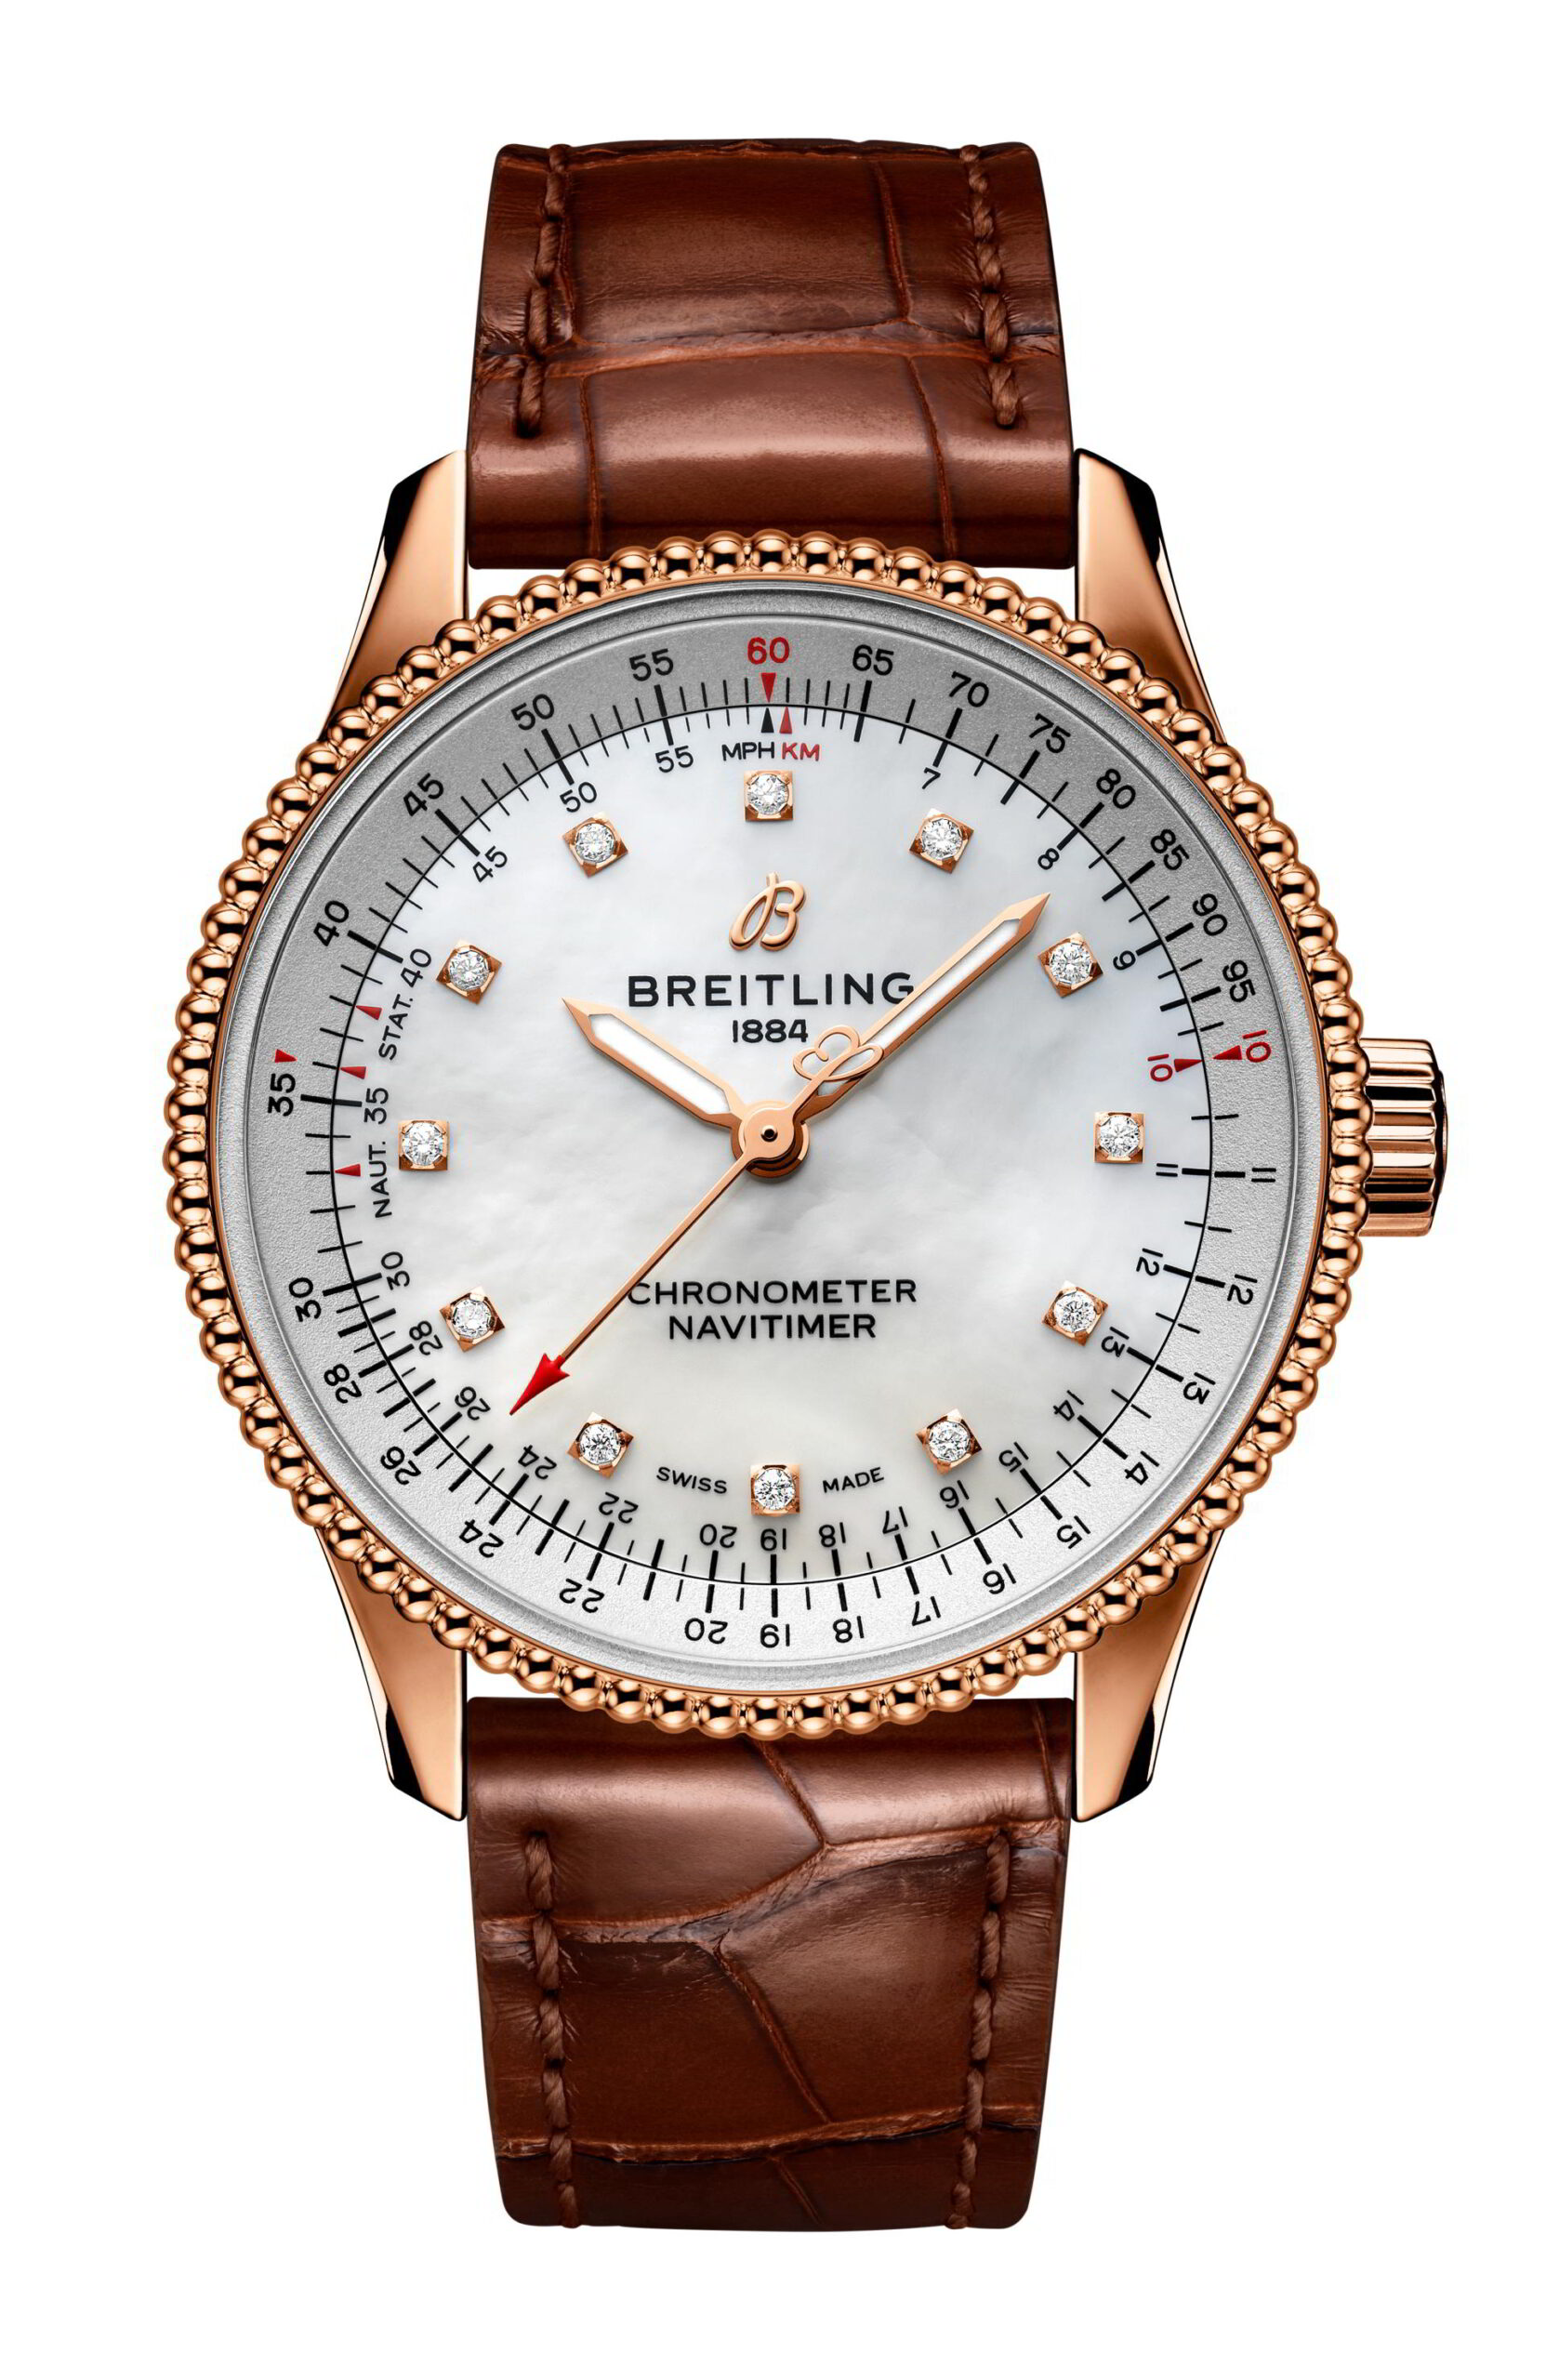 Breitling New Friend of Breitling